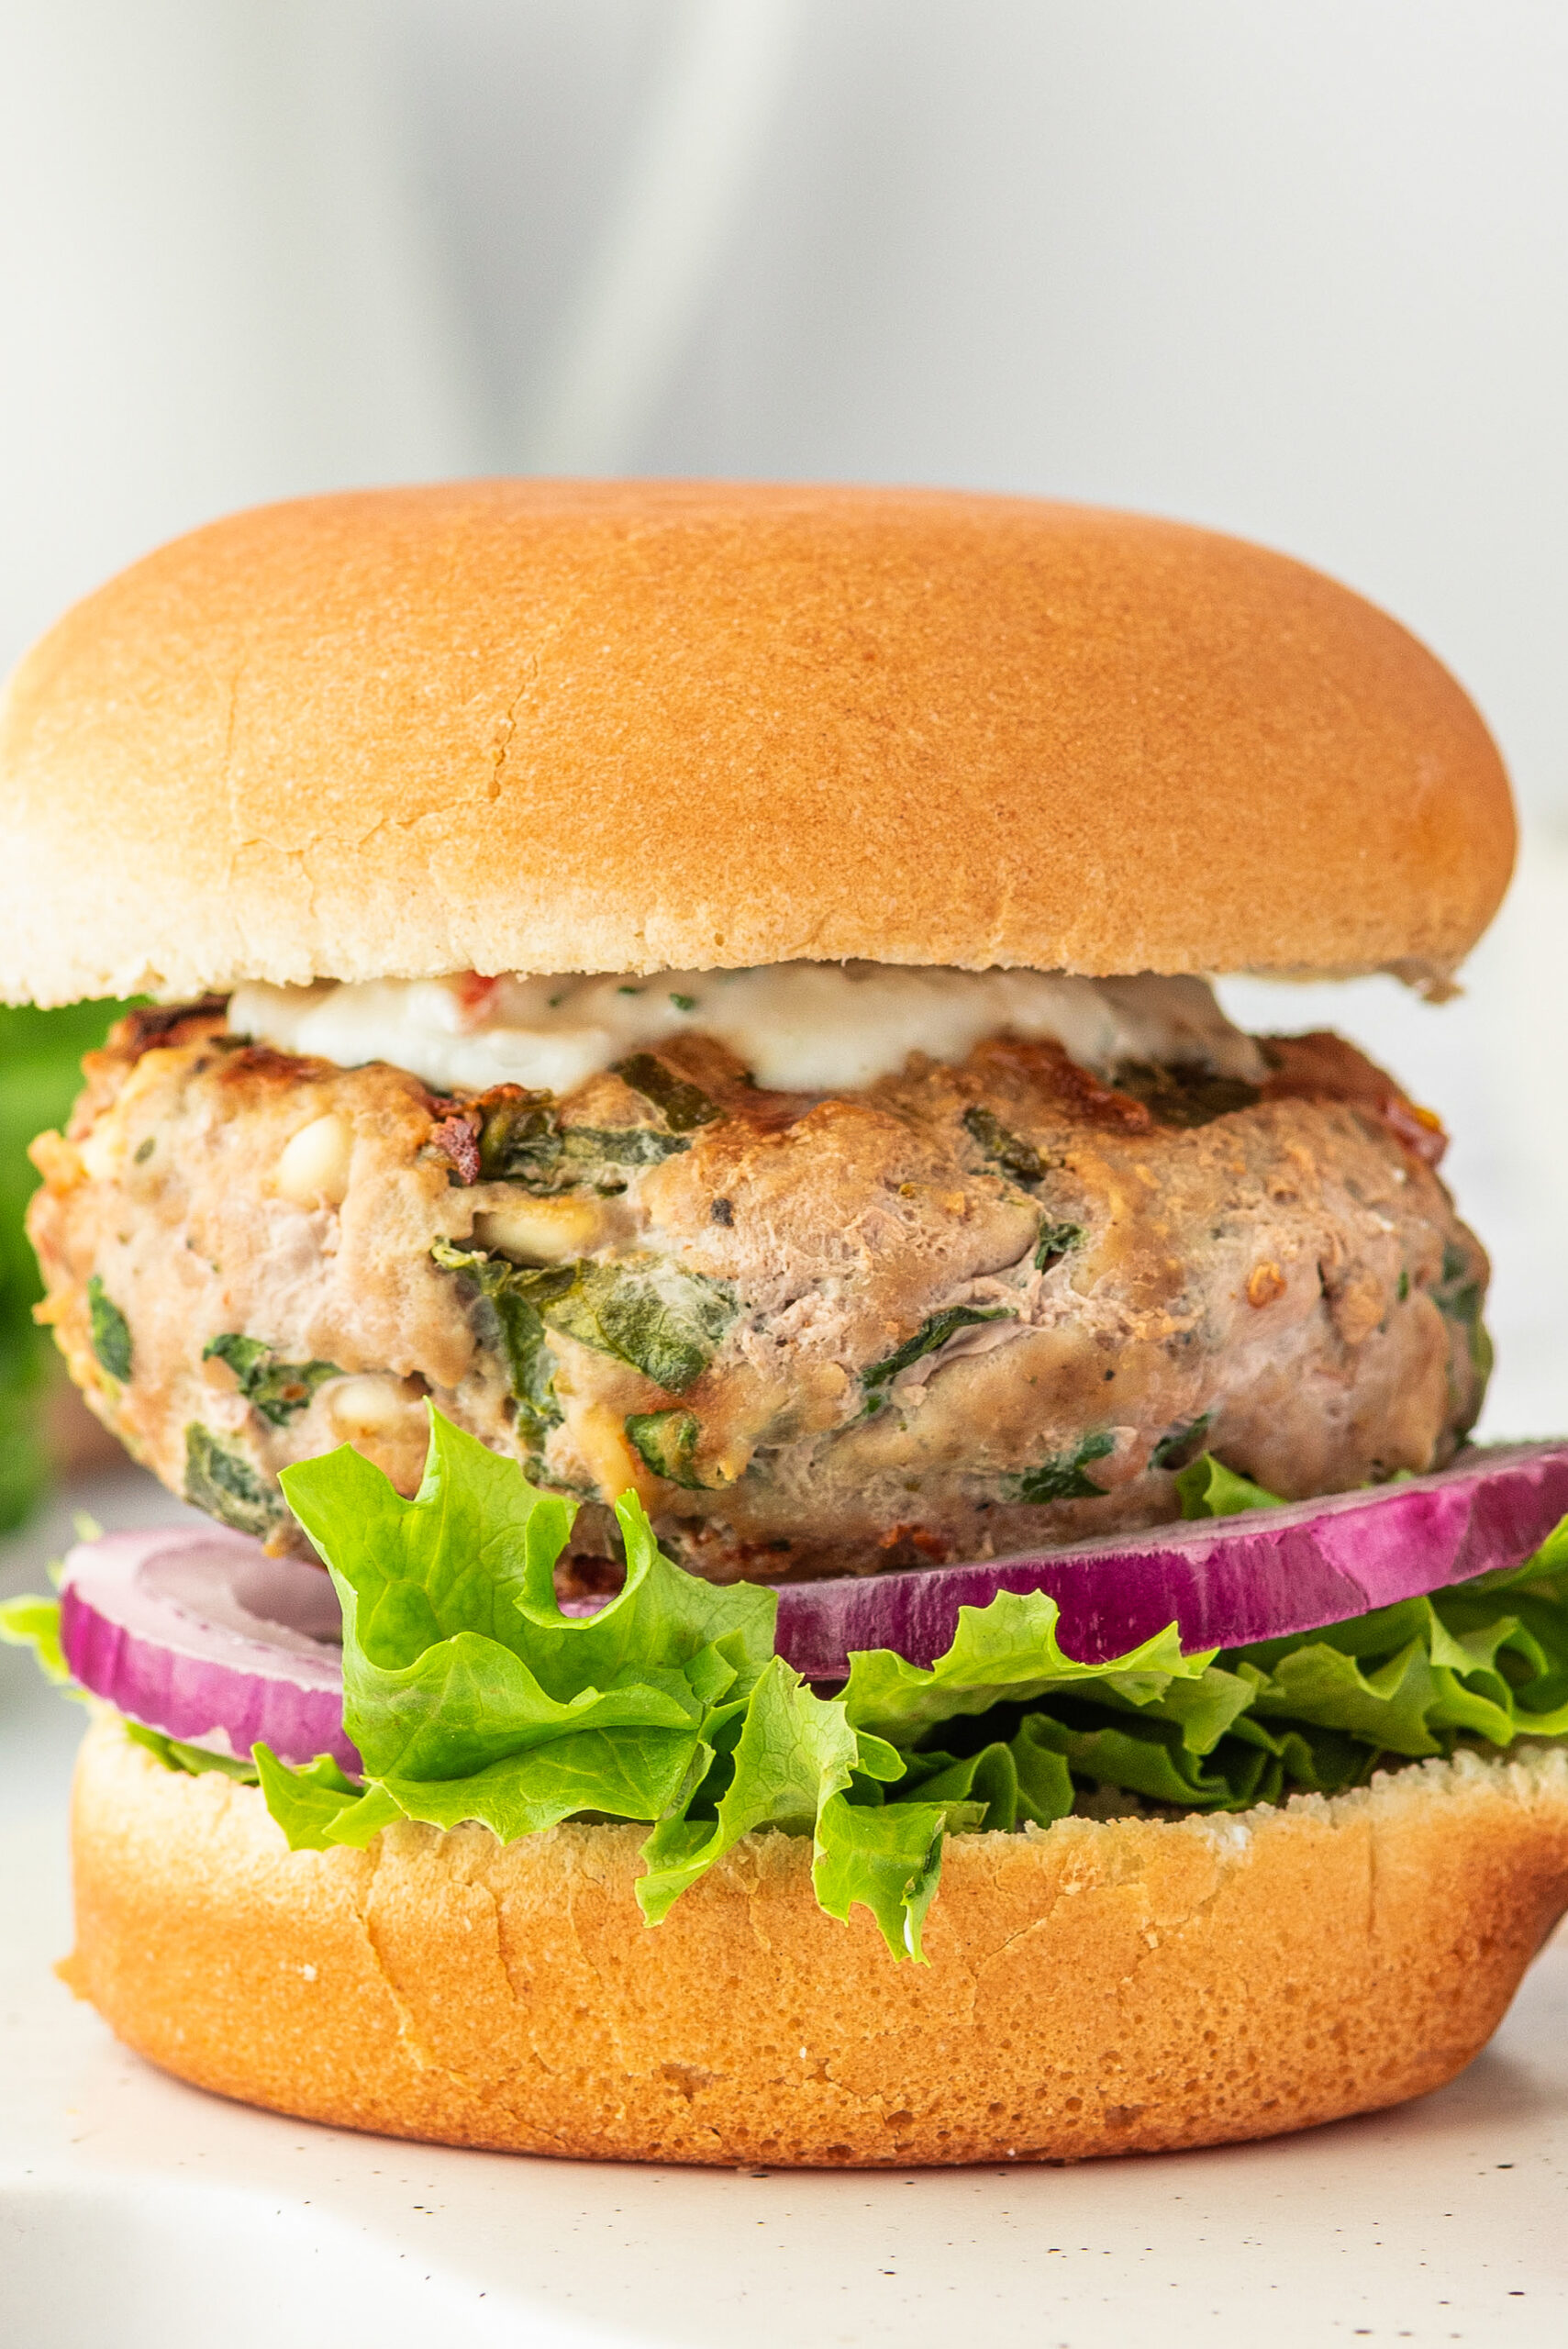 Up close image of a turkey burger with feta and spinach on a bun with tzatziki sauce.